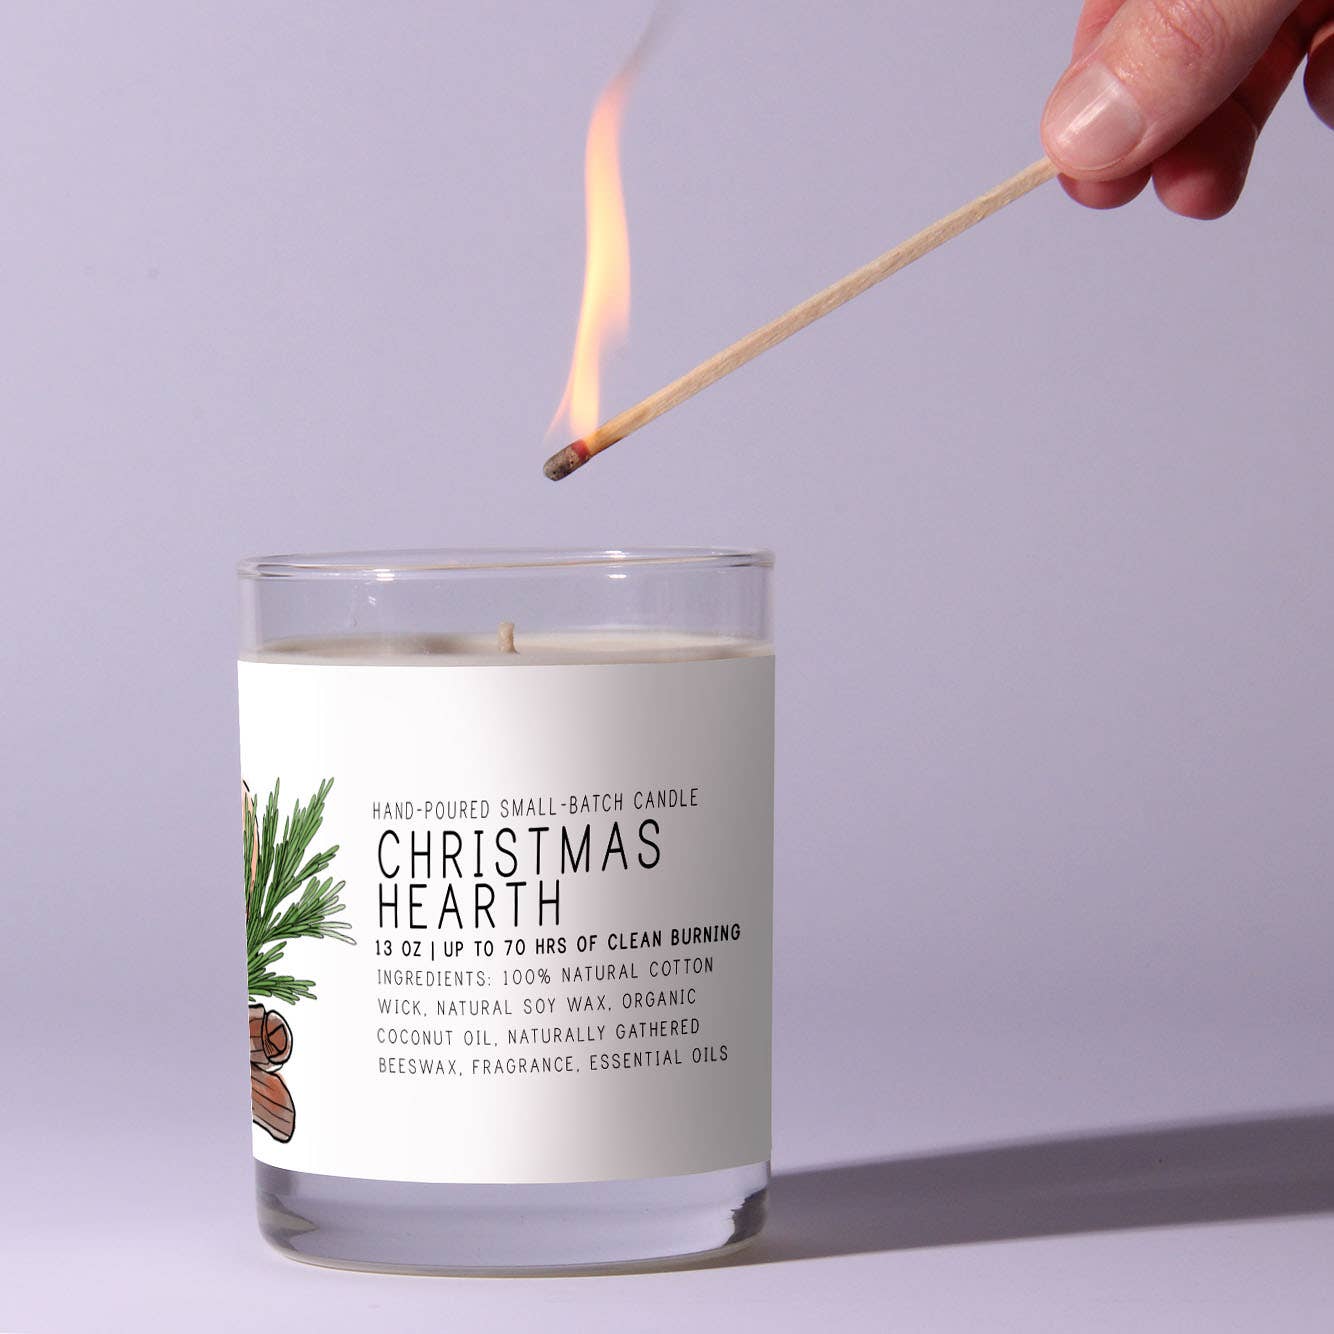 Just Bee Cosmetics - Christmas Hearth - Just Bee Candles: 7 oz (up to 40 hrs of clean burning)